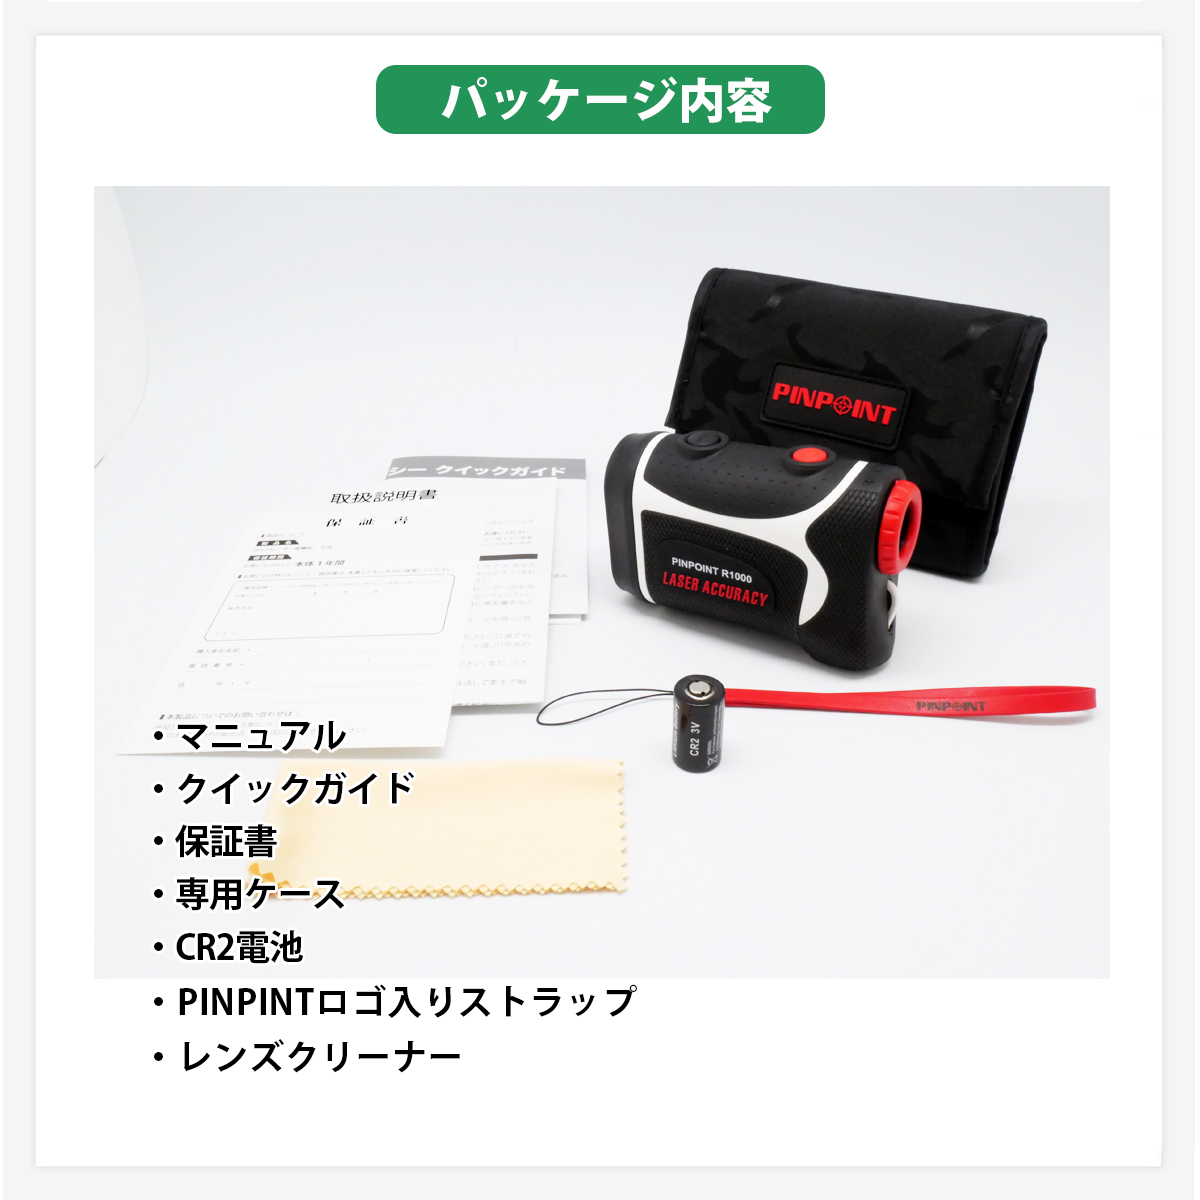 LASER ACCURACY PINPOINT R1000 セット内容